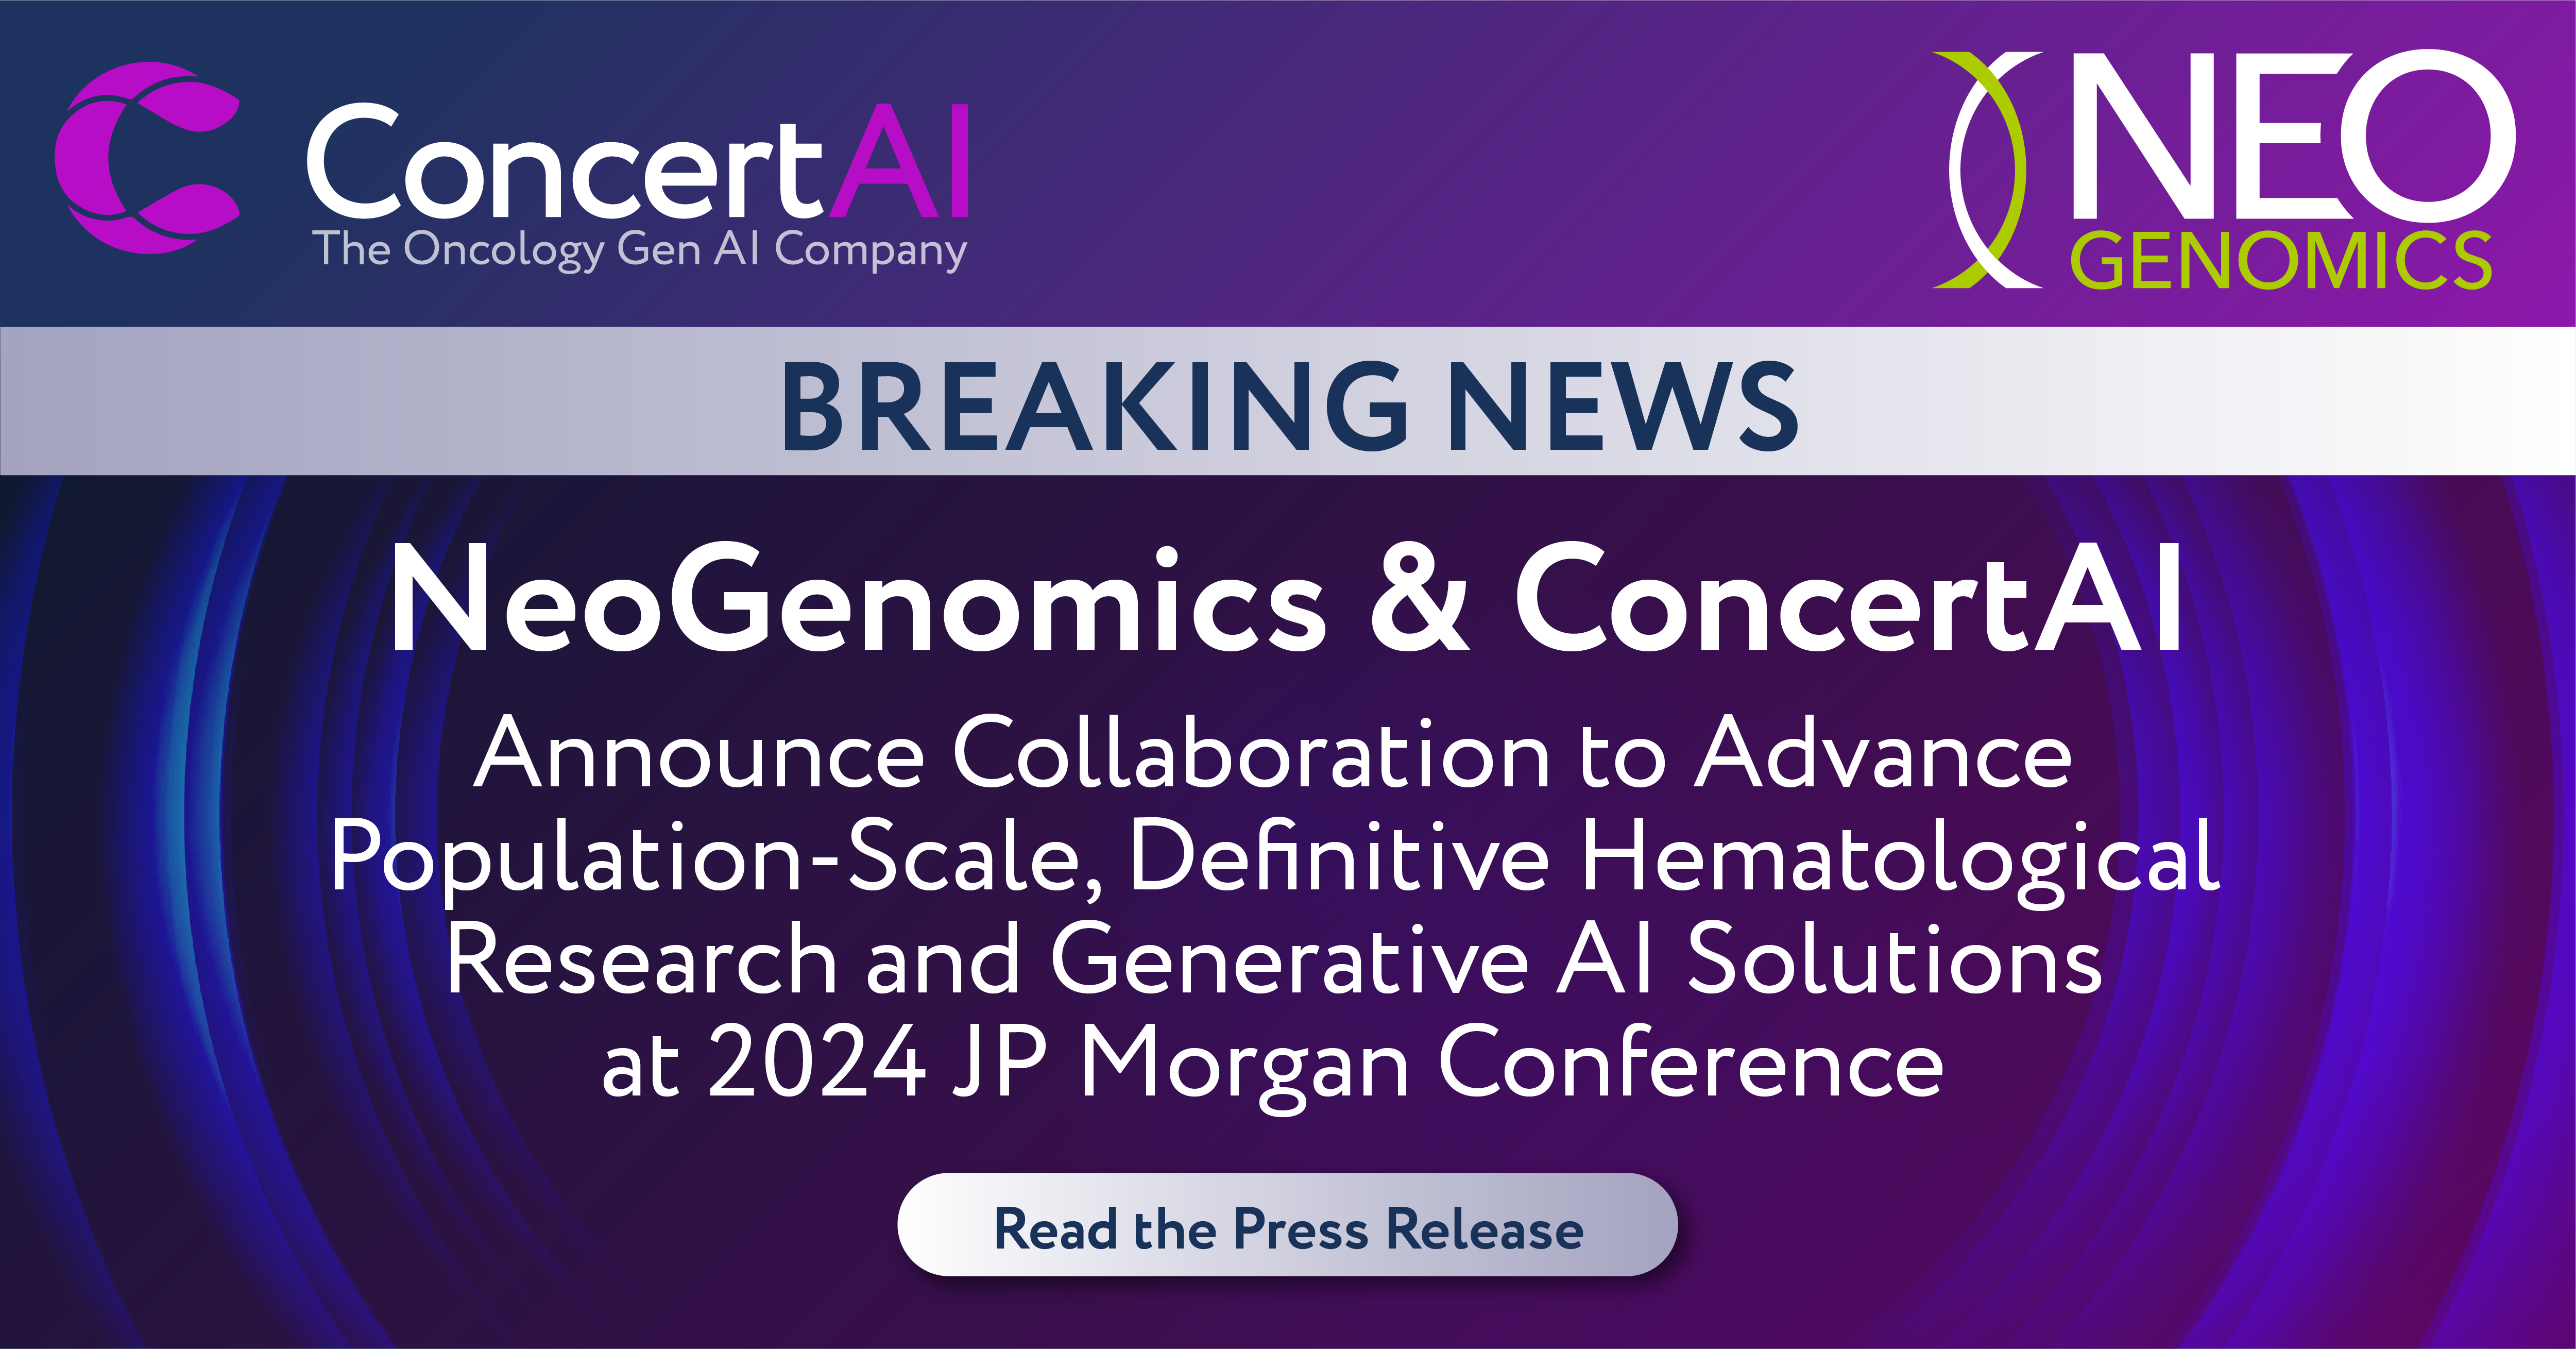 ConcertAI & NeoGenomics Announce Collaboration to Advance Population-Scale, Definitive Hematological Research & Generative AI Solutions at 2024 JP Morgan Conference